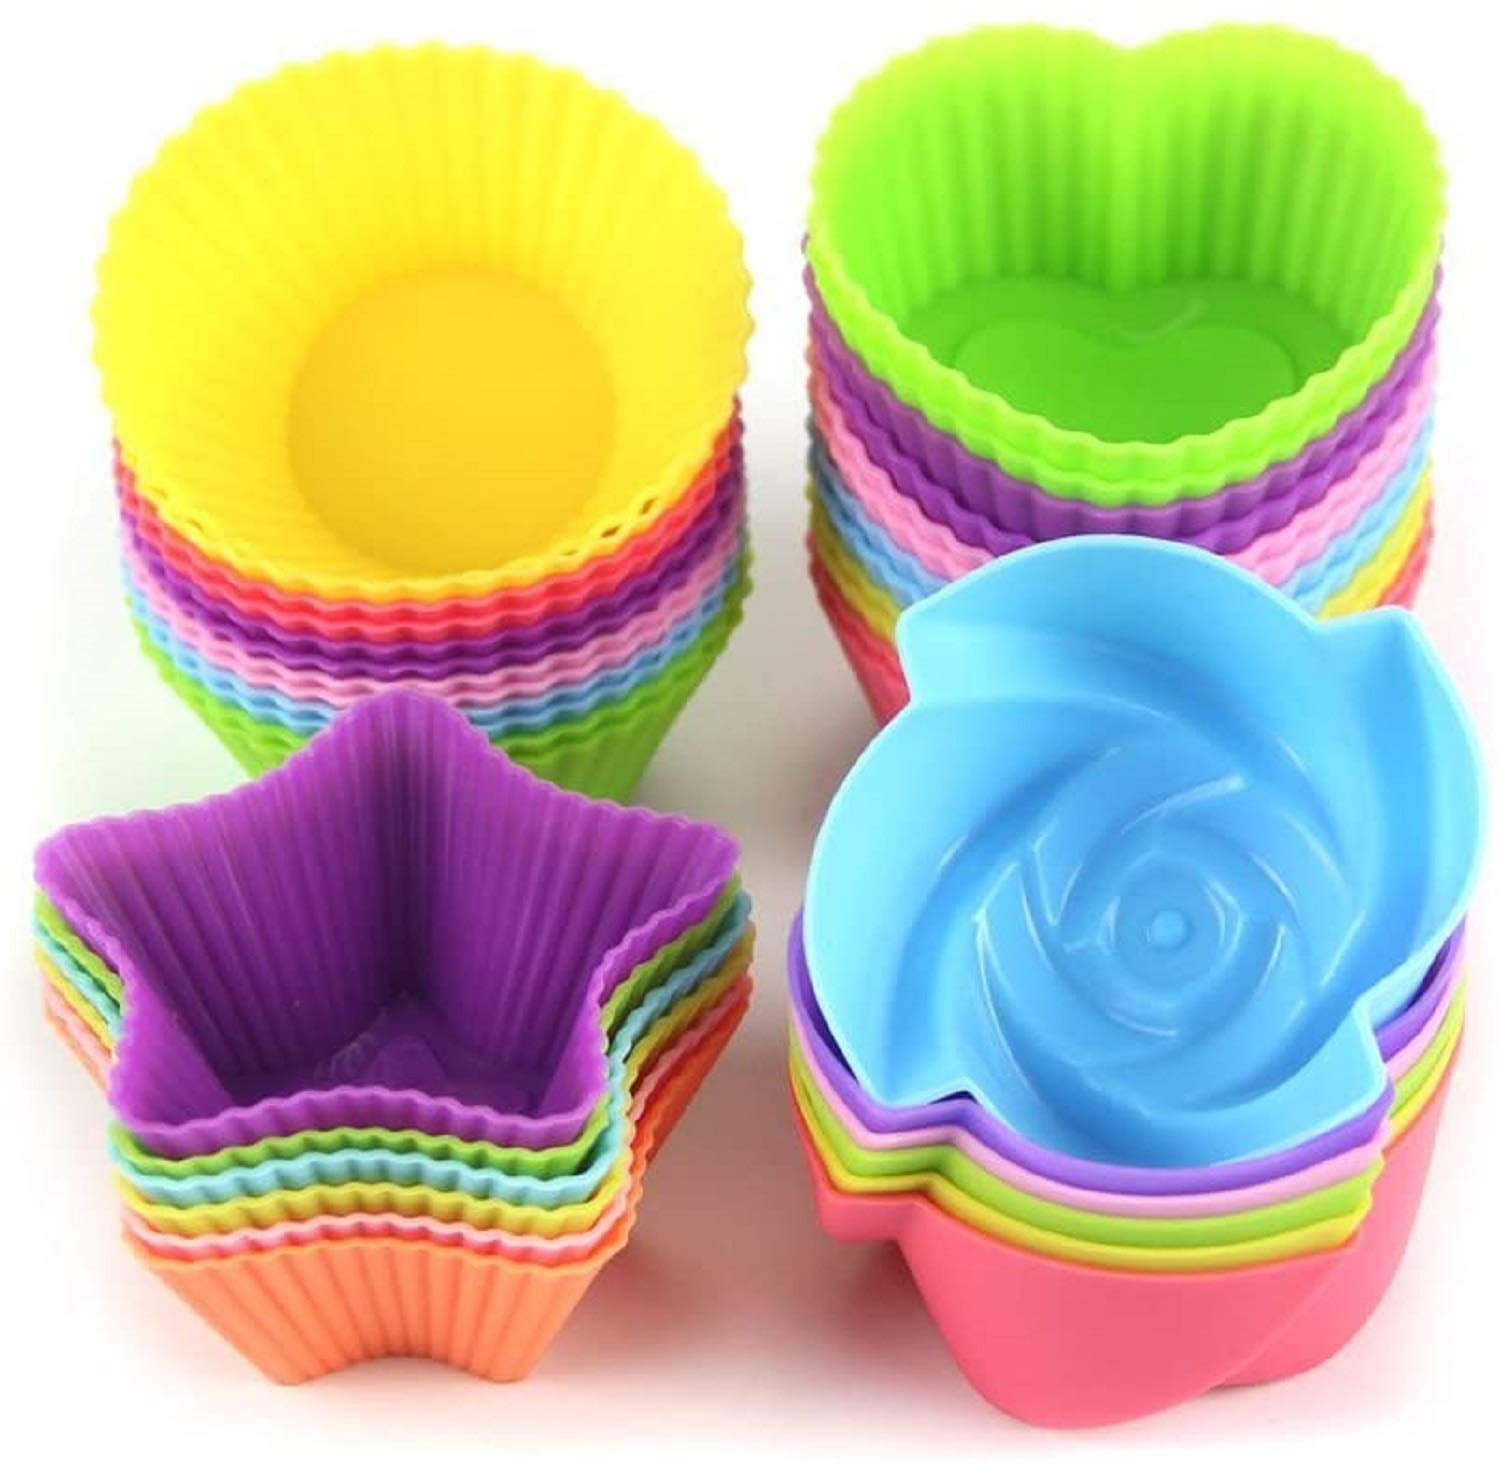 Mini Silicone Baking Cups Plum Blossom Pack of 24 Nonstick Small Truffle Chocolate Jello Cups in 6 Colors Mini Plum Blossom Reusable Baking Cupcake Liners Muffin Molds 2 inch 